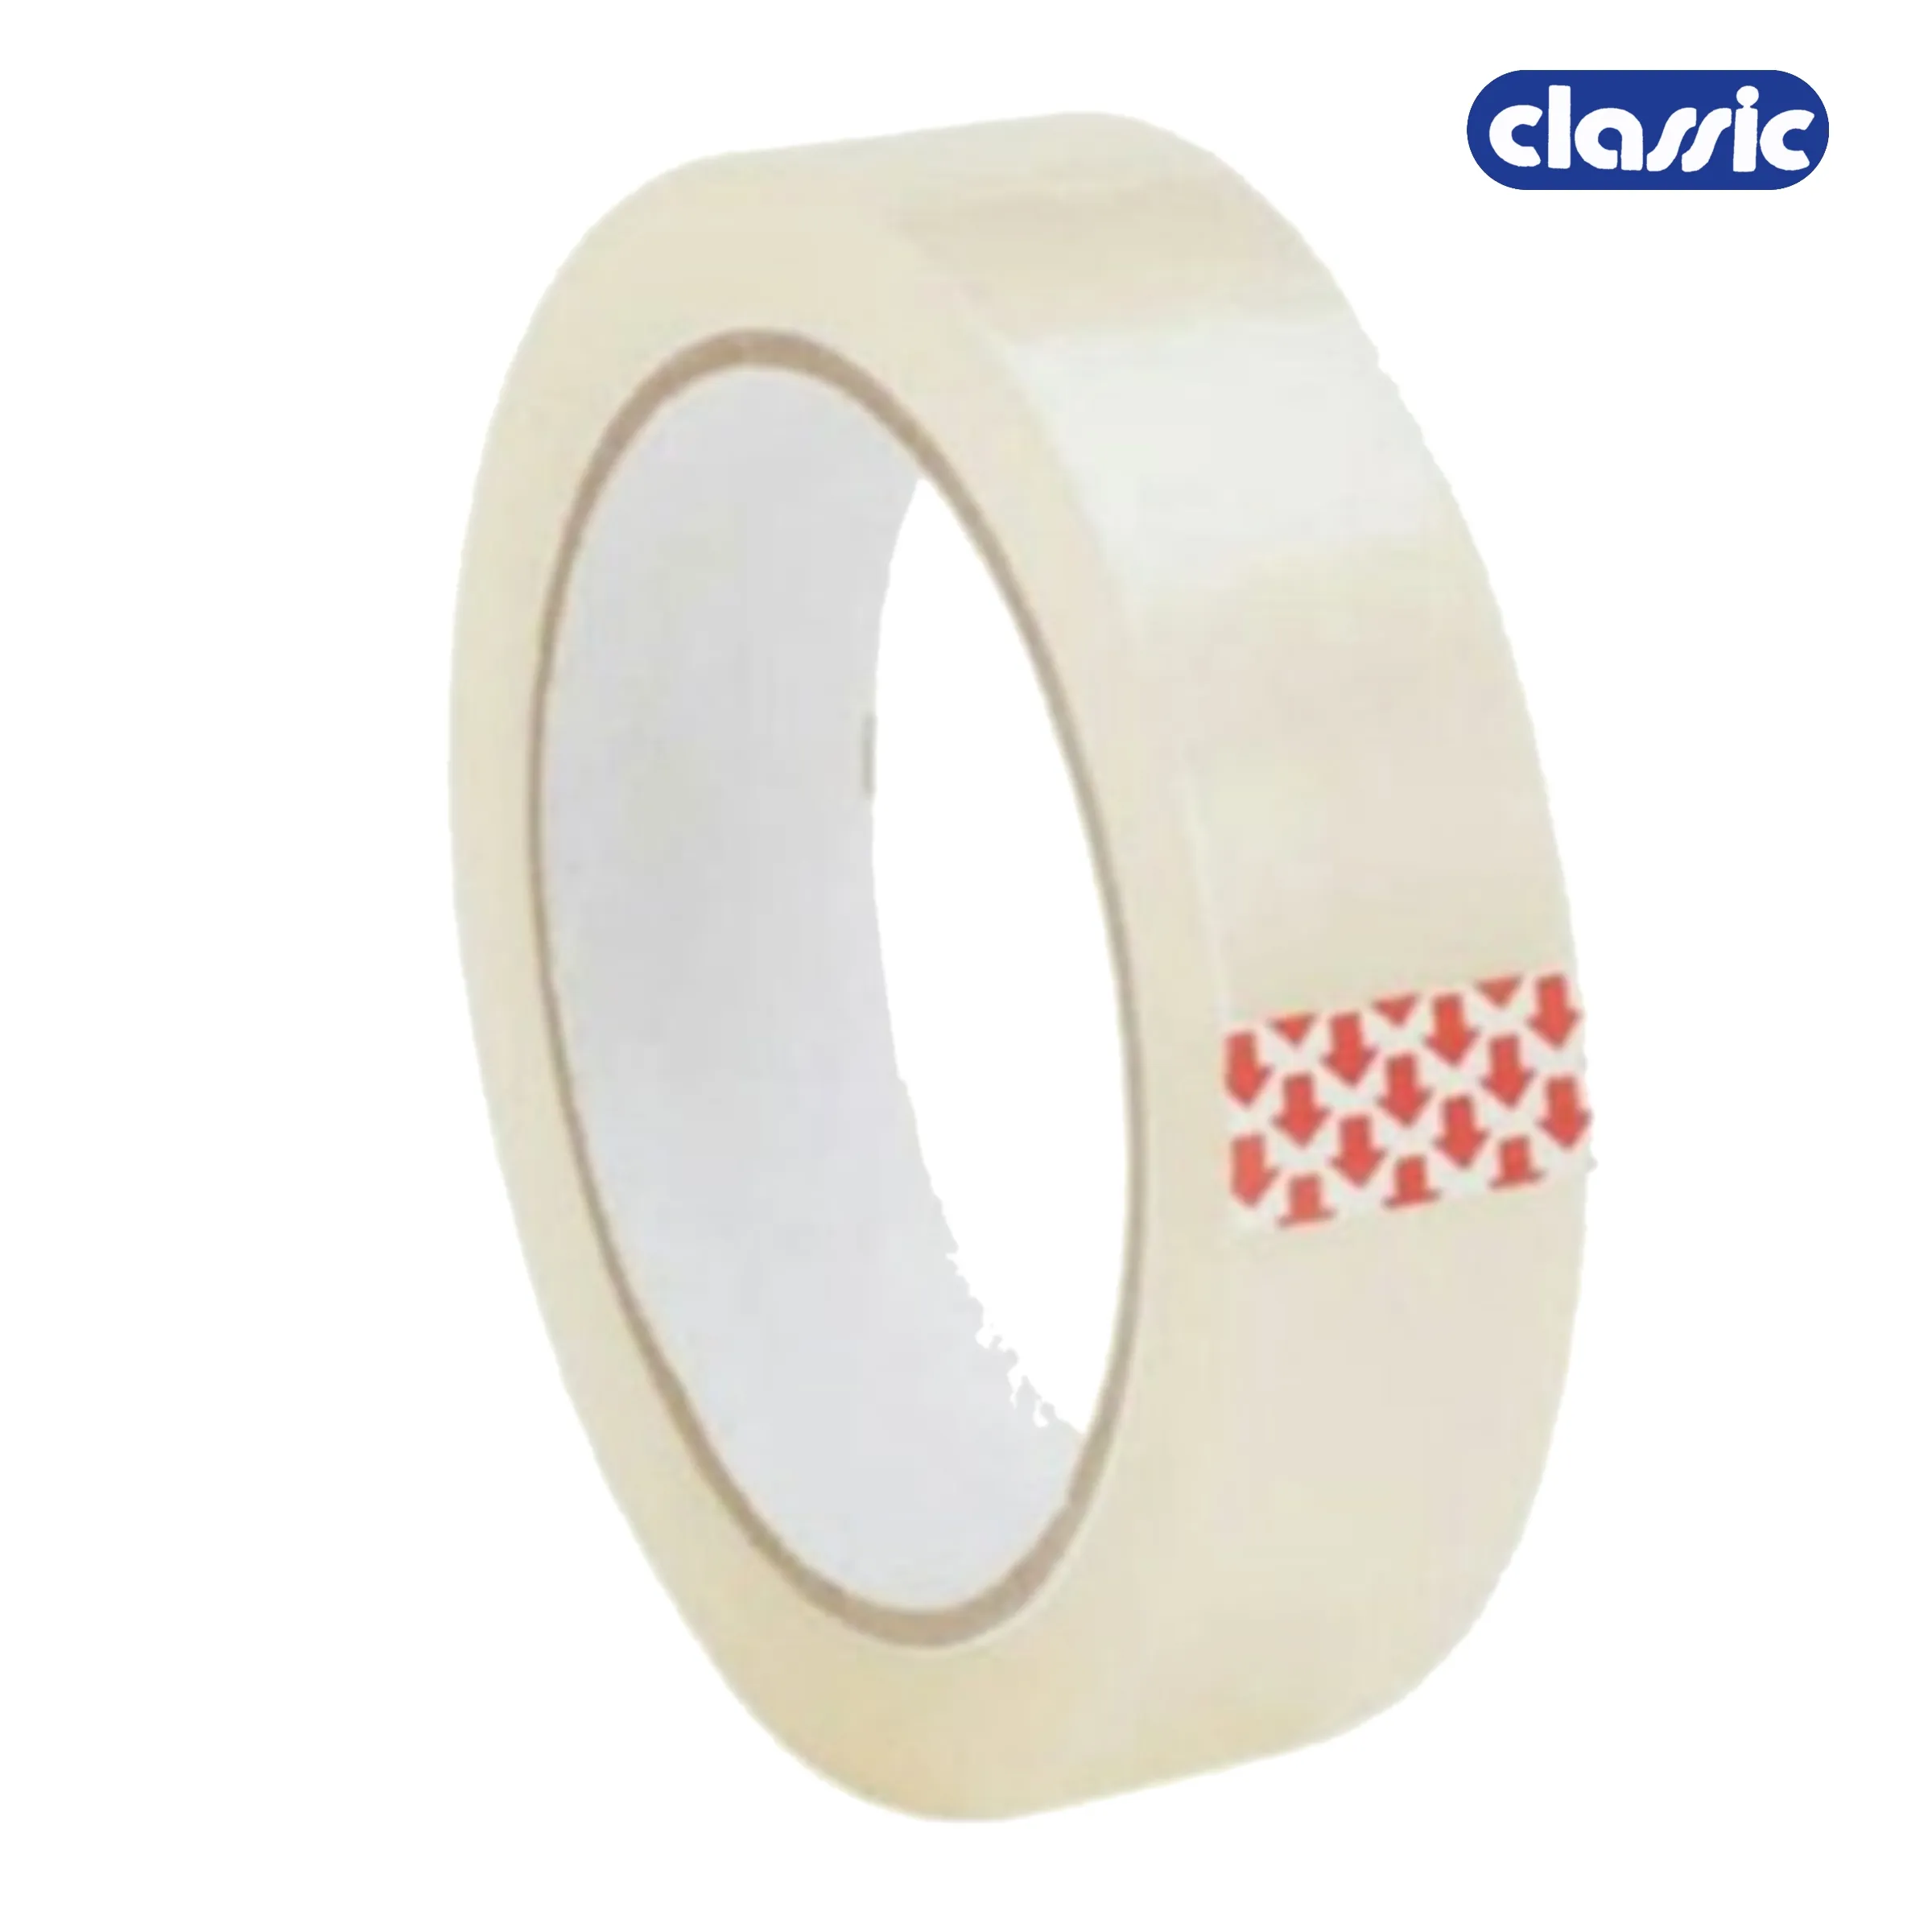 Classic 30 Micron 24 mm/1 Inch Transparent Self Adhesive Tape, Premium Quality, 1 Pack of 6 Roll